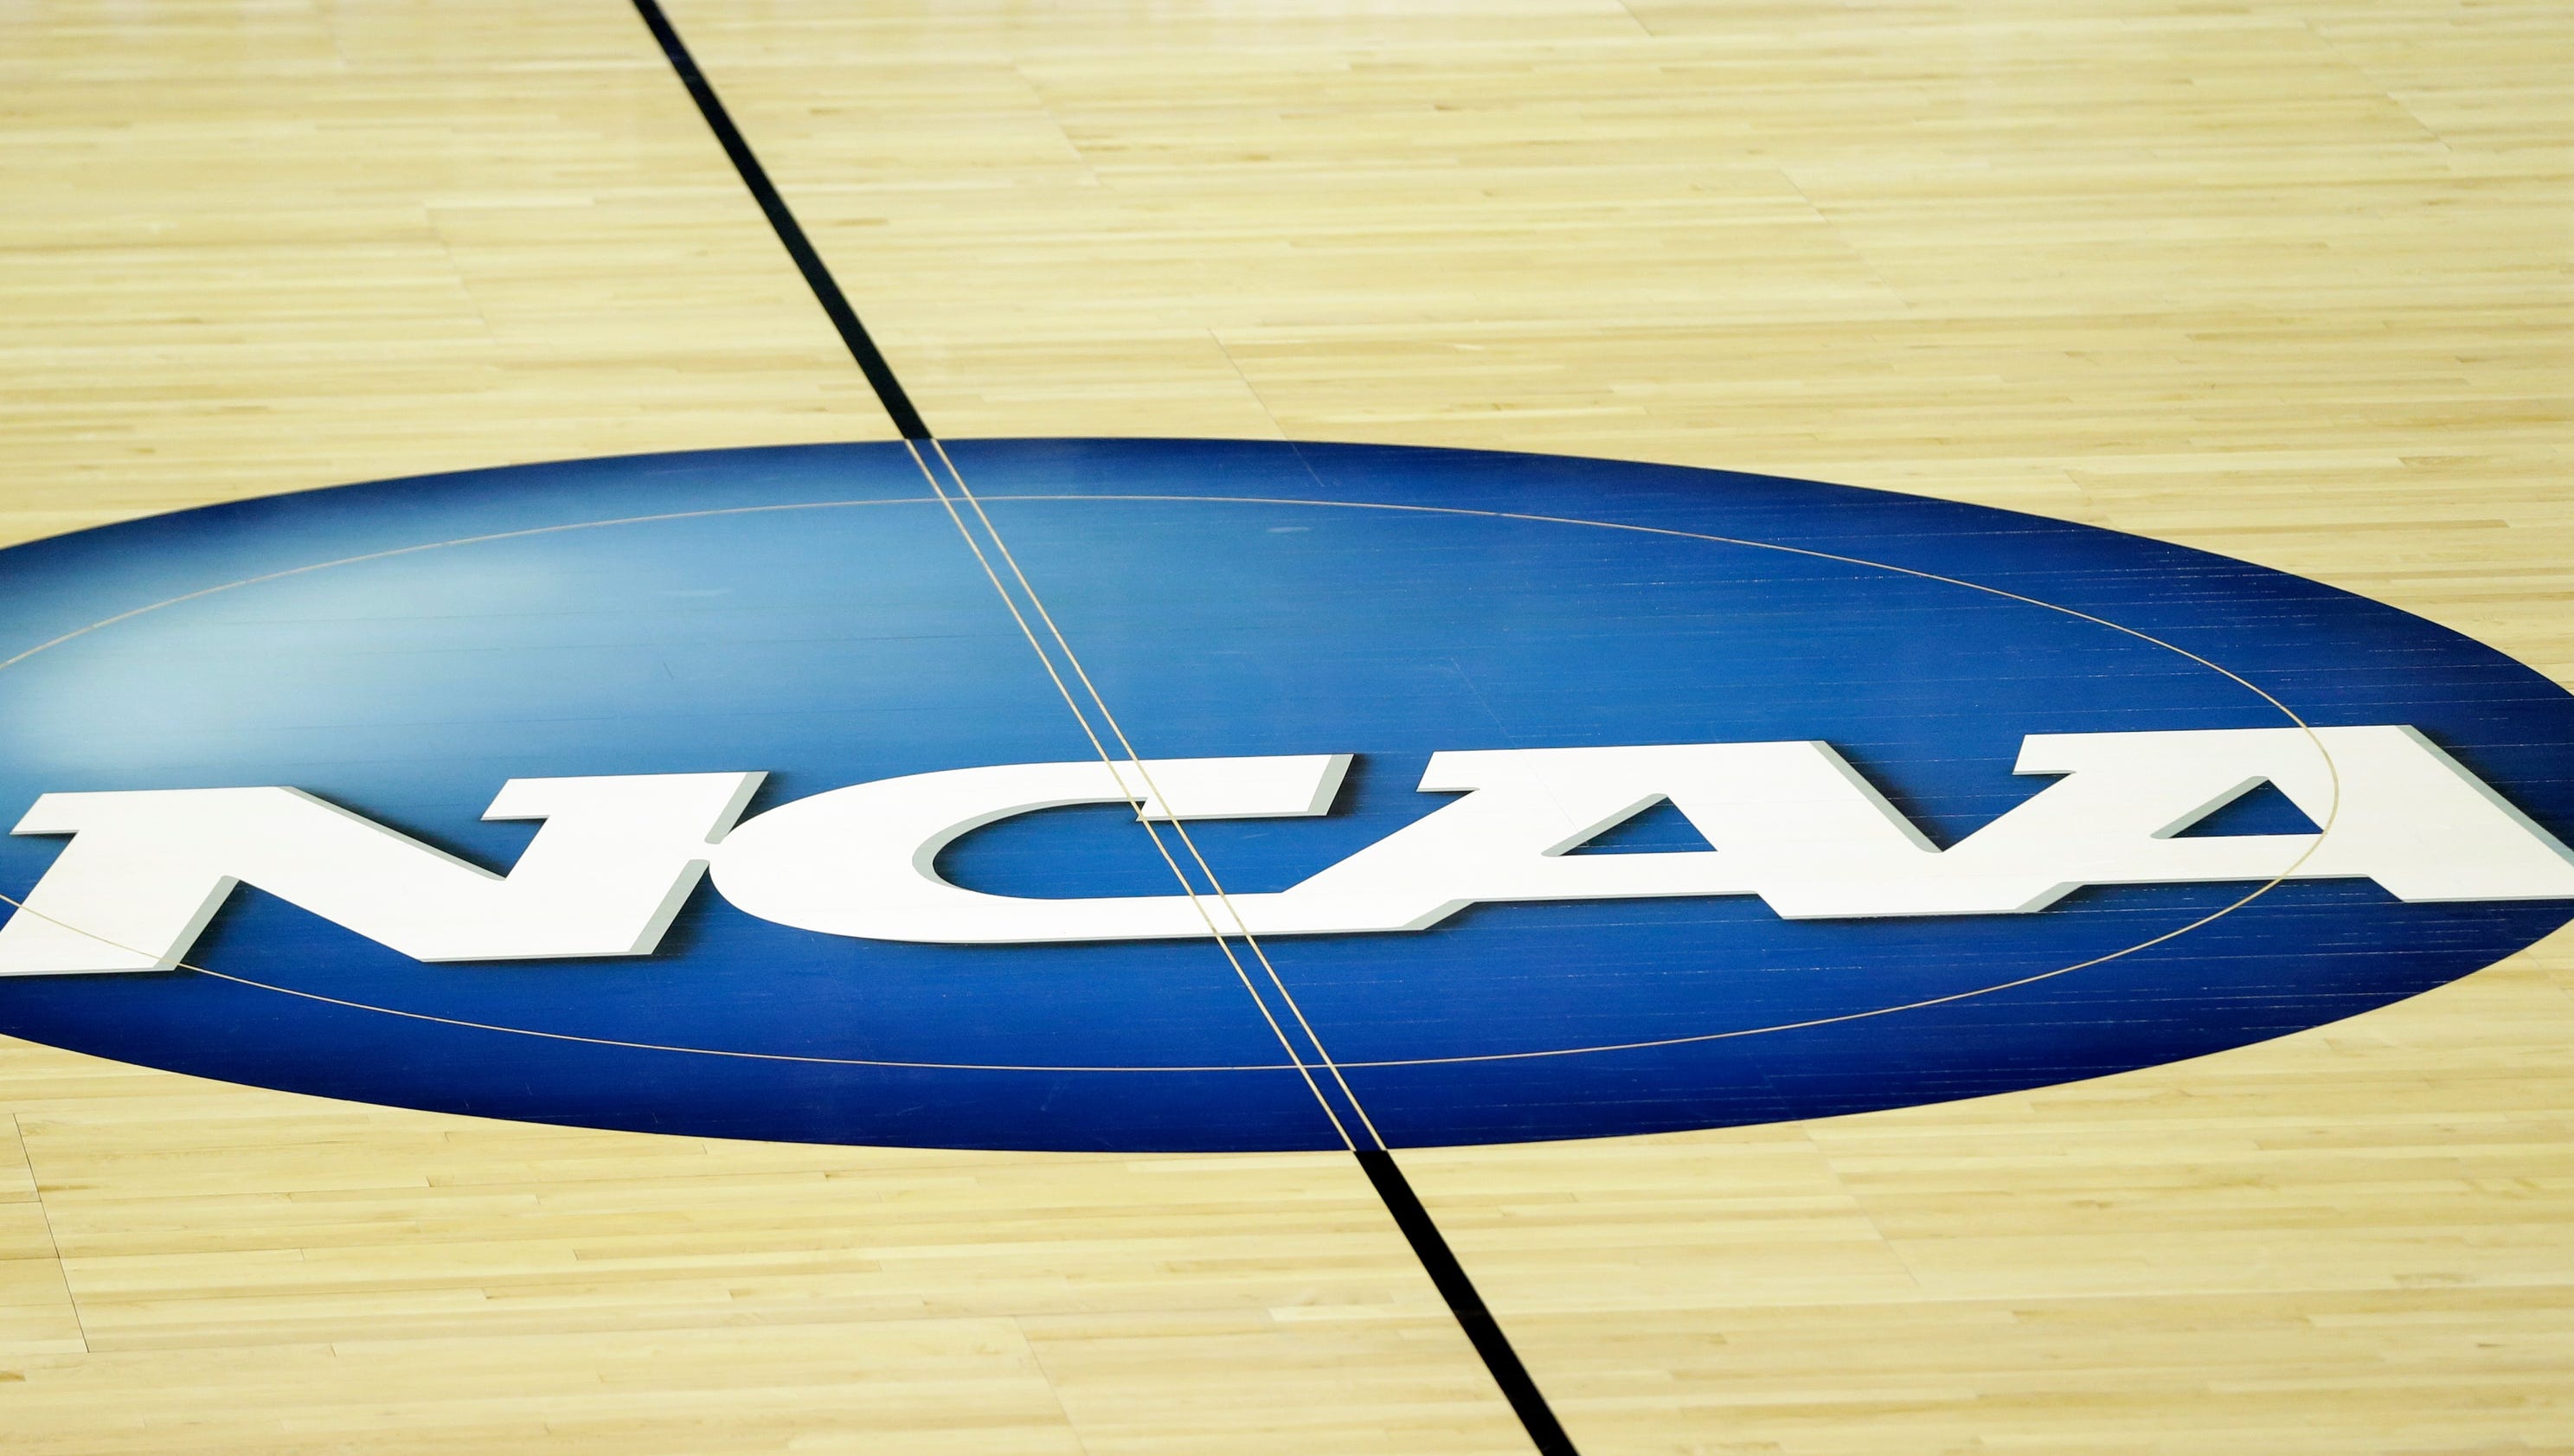 NCAA has net assets of $627 million, say records